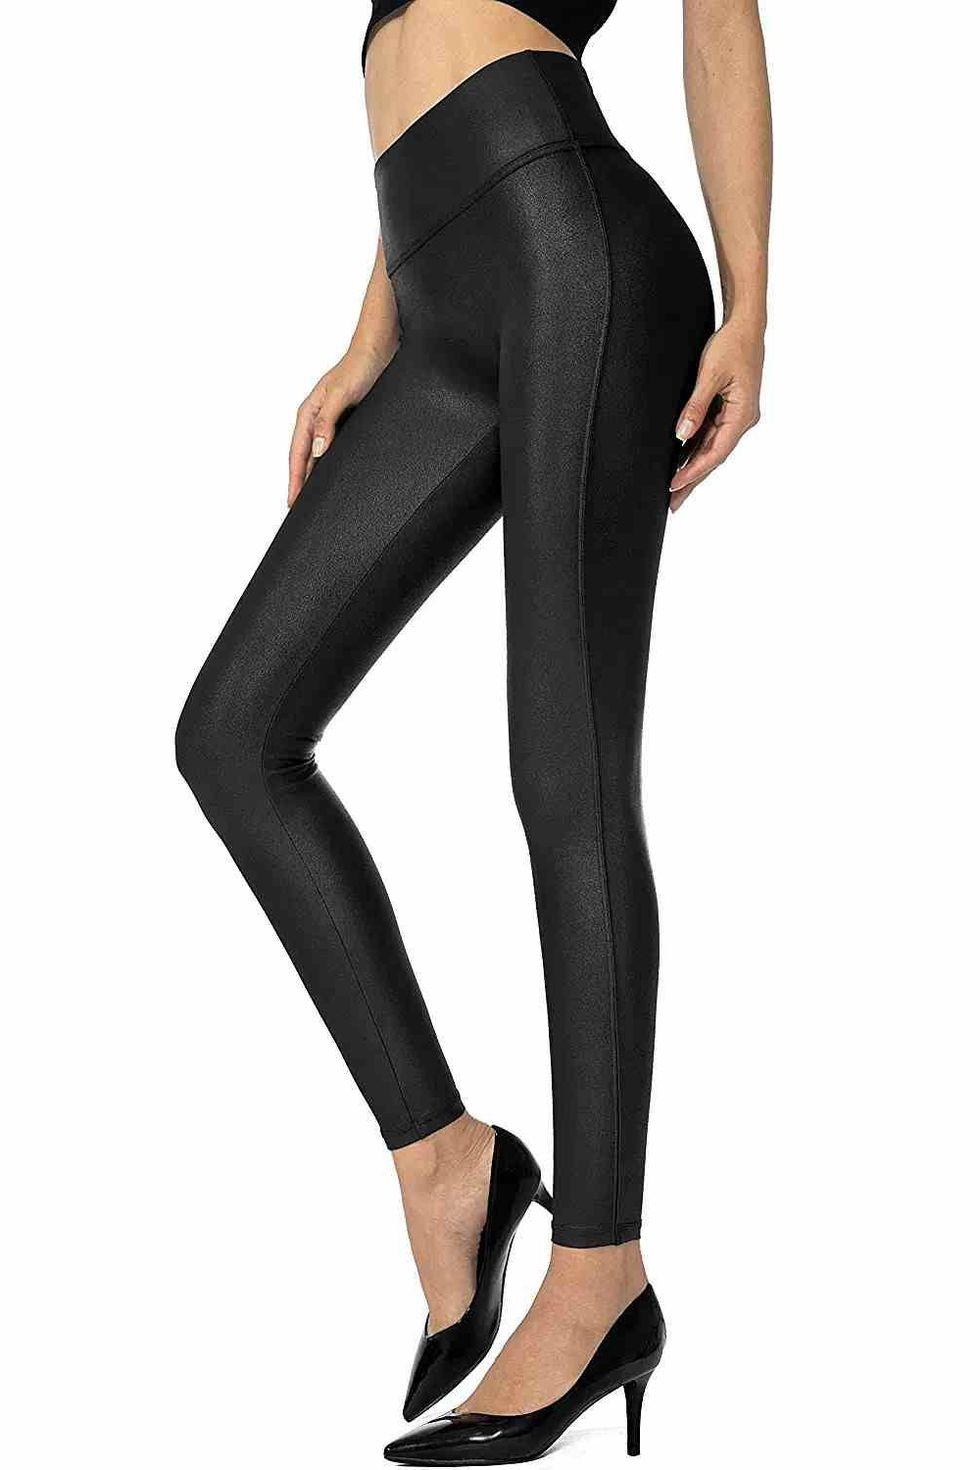 Women's PU Leather High Rise Cropped Leggings Workout XL 